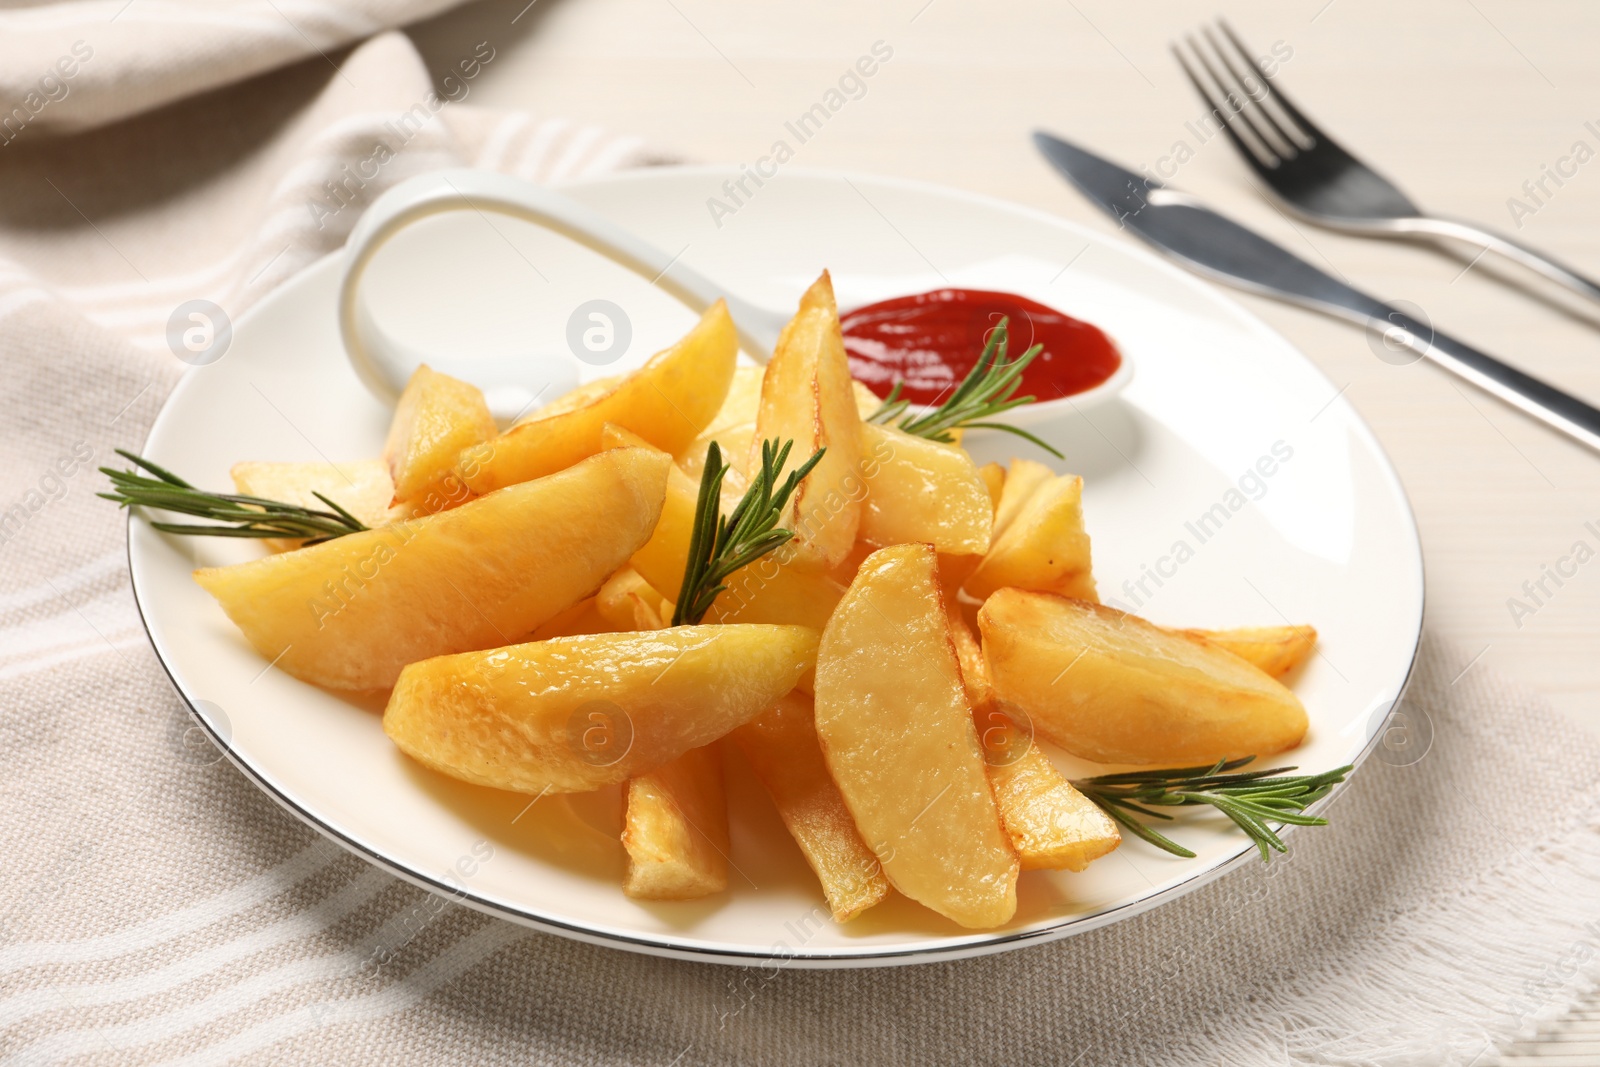 Photo of Plate with tasty baked potato wedges, rosemary and sauce on table, closeup